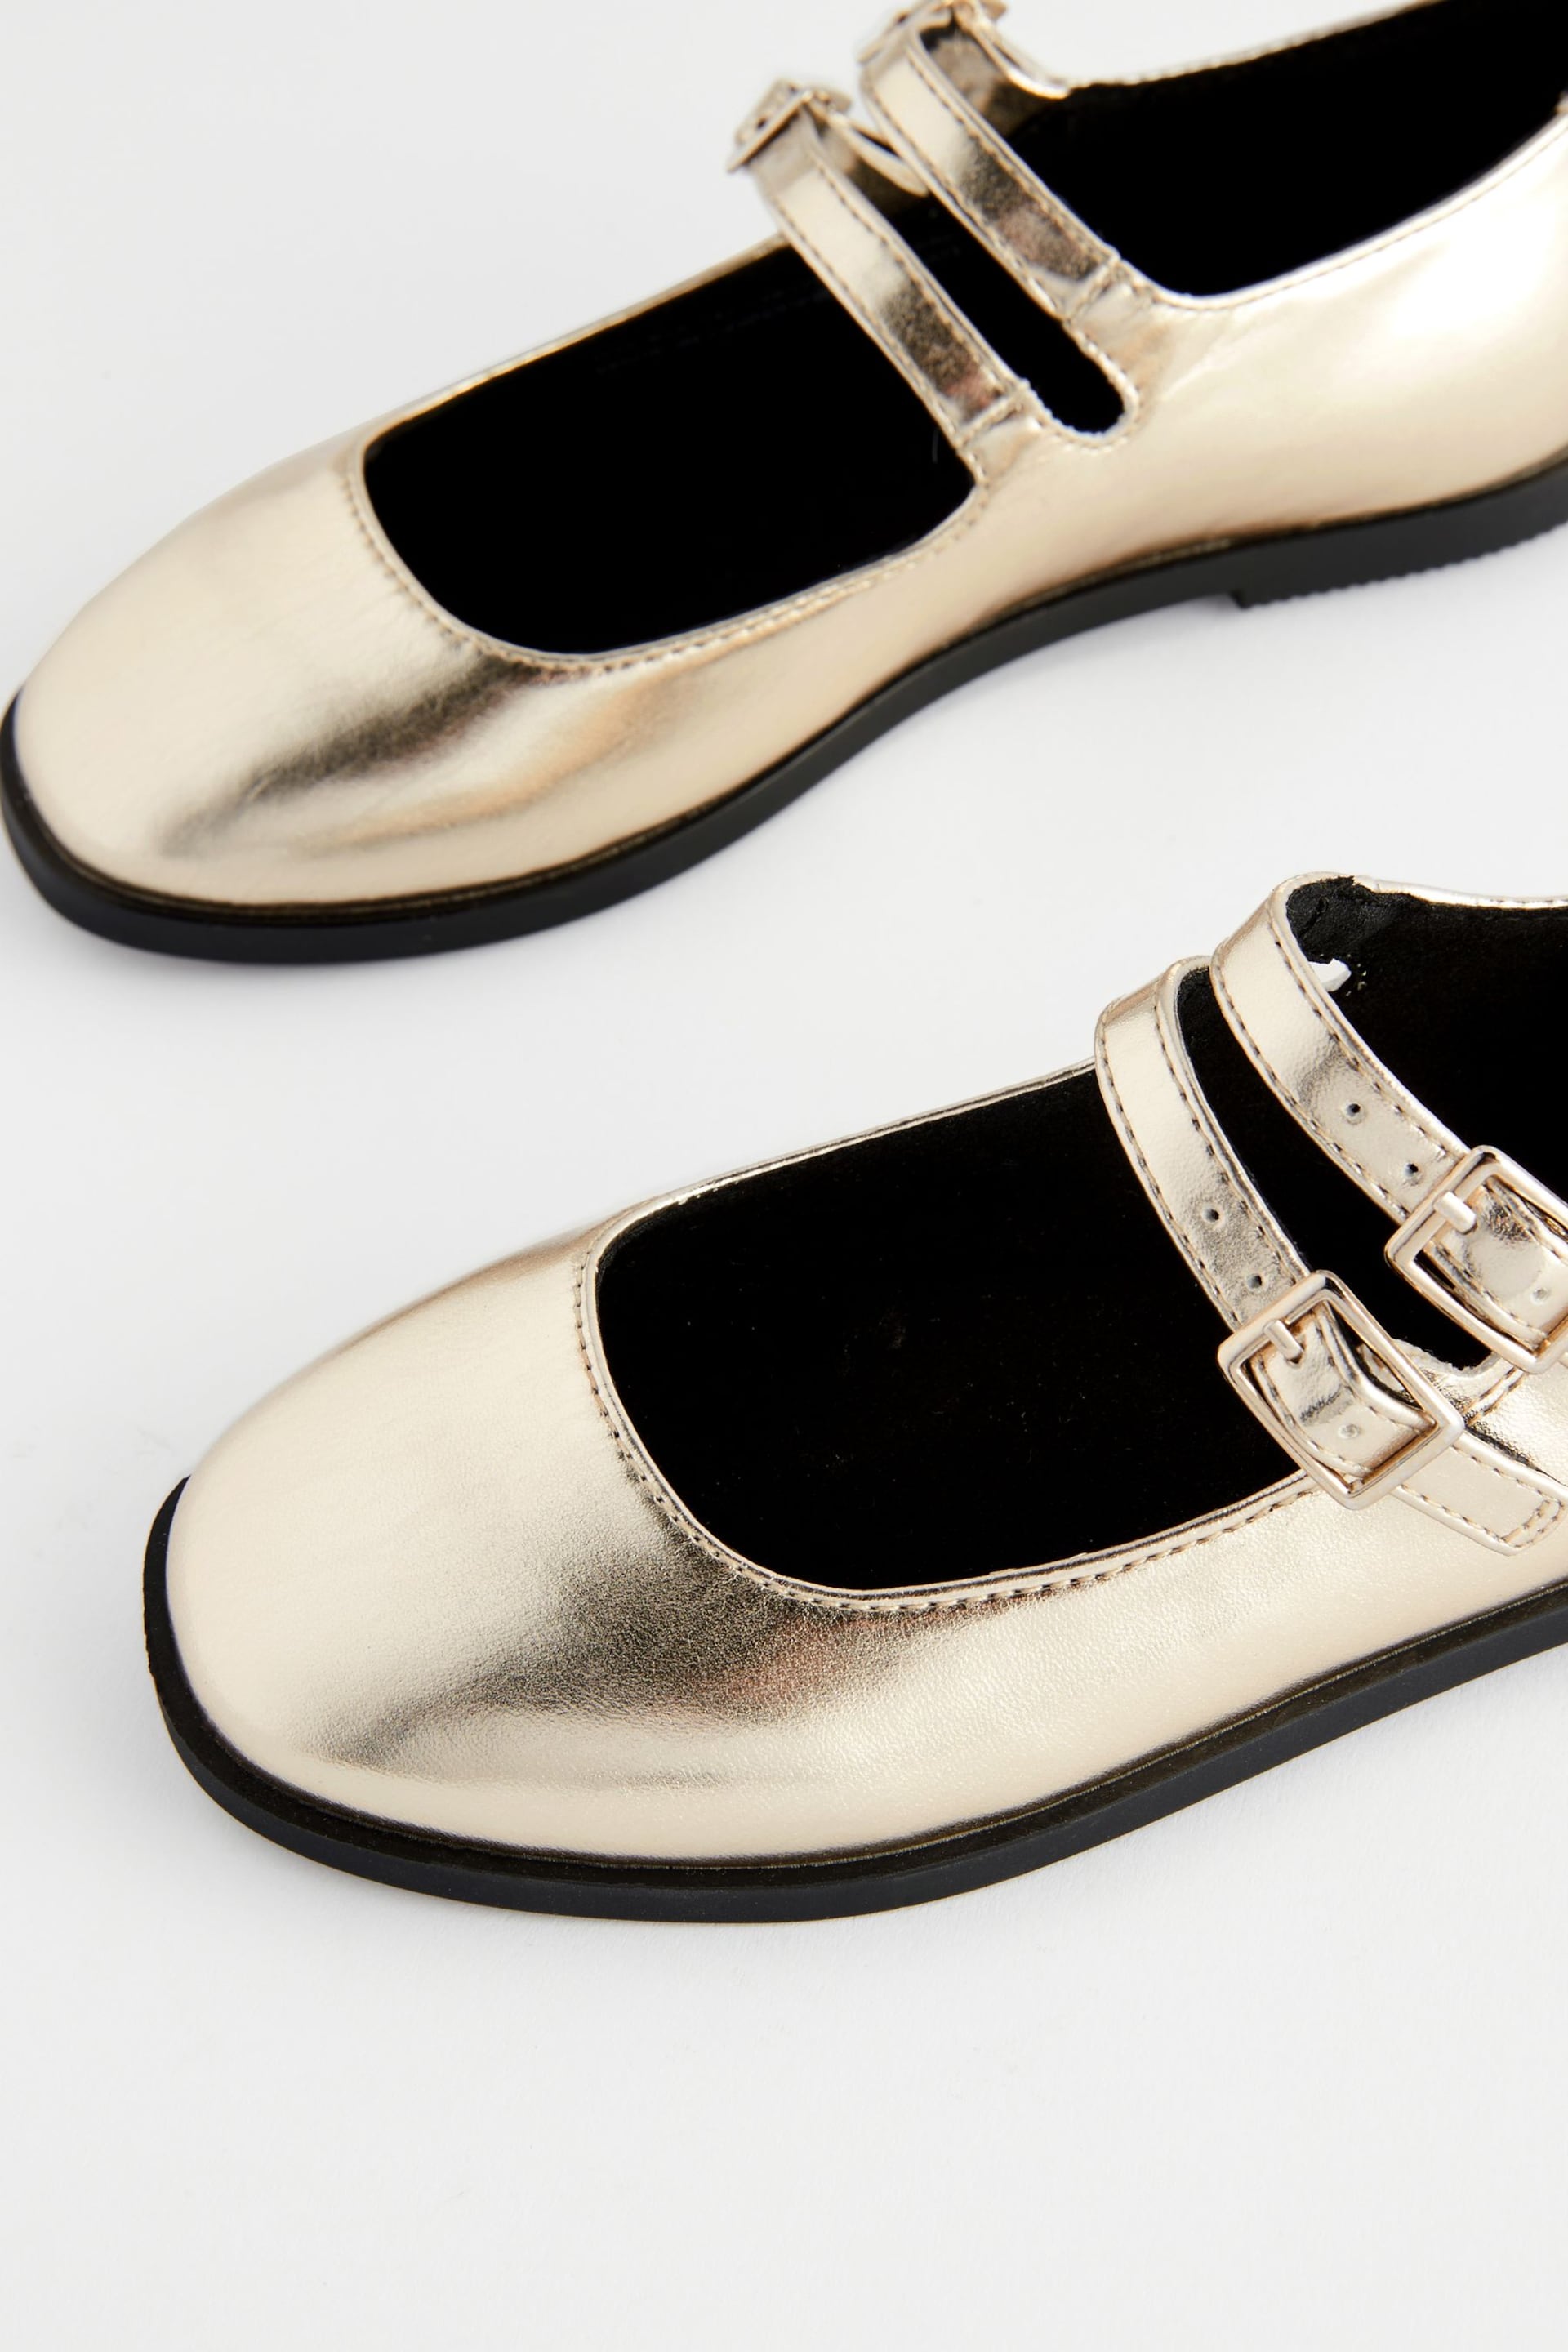 Gold Metallic Double Strap Mary Jane Shoes - Image 5 of 6